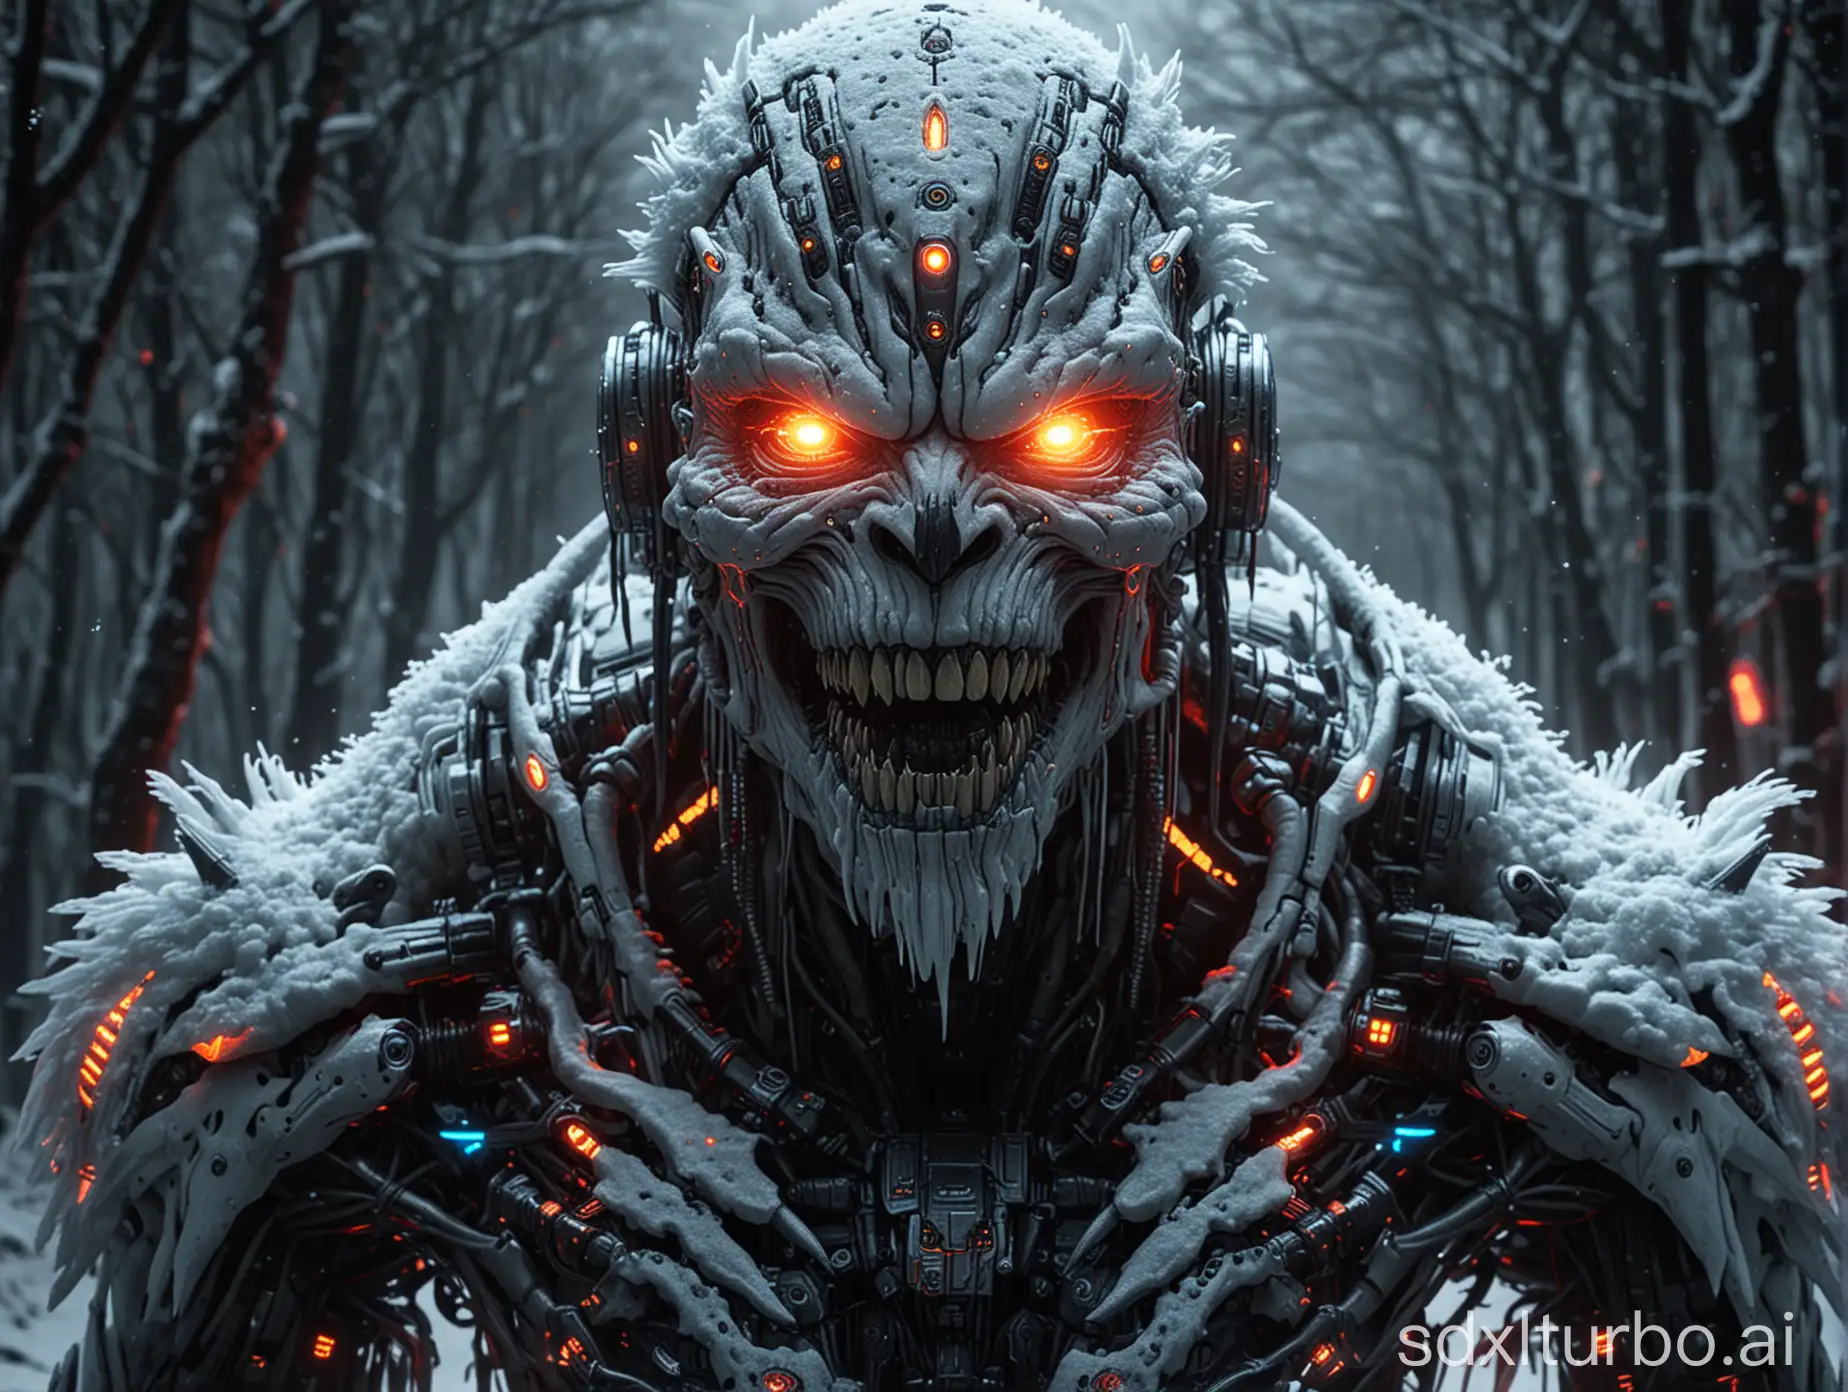 Horrible Terrifying Hyperrealistic cyberpunk Snow monster, cyborg with cybernetic implants glowing with neon cyberpunk colors, in a dark dystopian forest, blizzard, with long (needle-like teeth), fiery glowing eyes, sharp focus, intricate details, nighttime horror scene, framed perfectly, 8k, Cinema 4D render